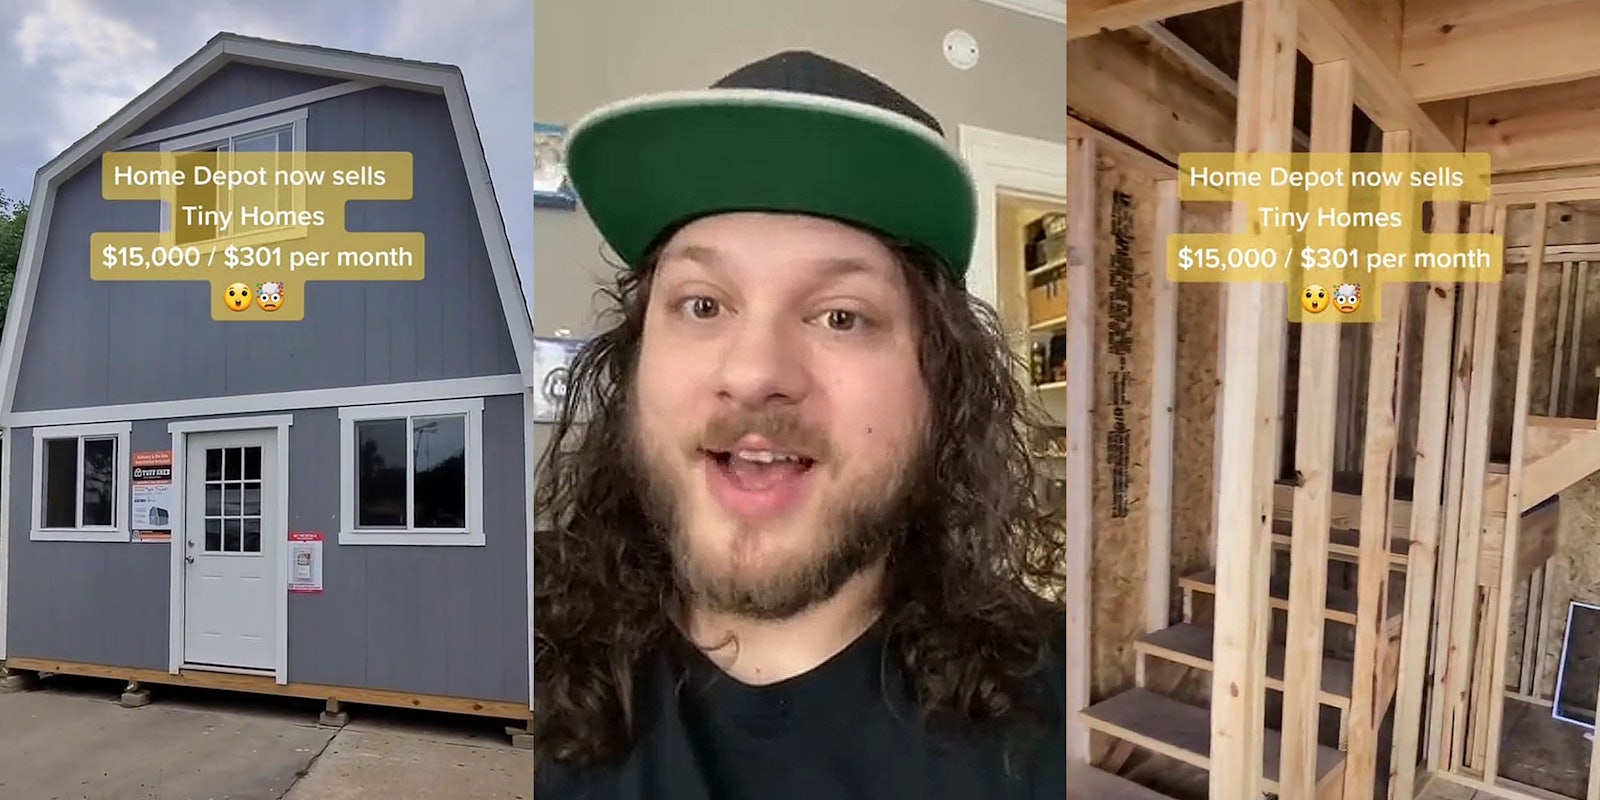 Home Depot 2 story shed outside caption 'Home Depot now sells Tiny Homes $15,000/$301 per month' (l) man speaking (c) Home Depot 2 story shed interior caption 'Home Depot now sells Tiny Homes $15,000/$301 per month' (r)